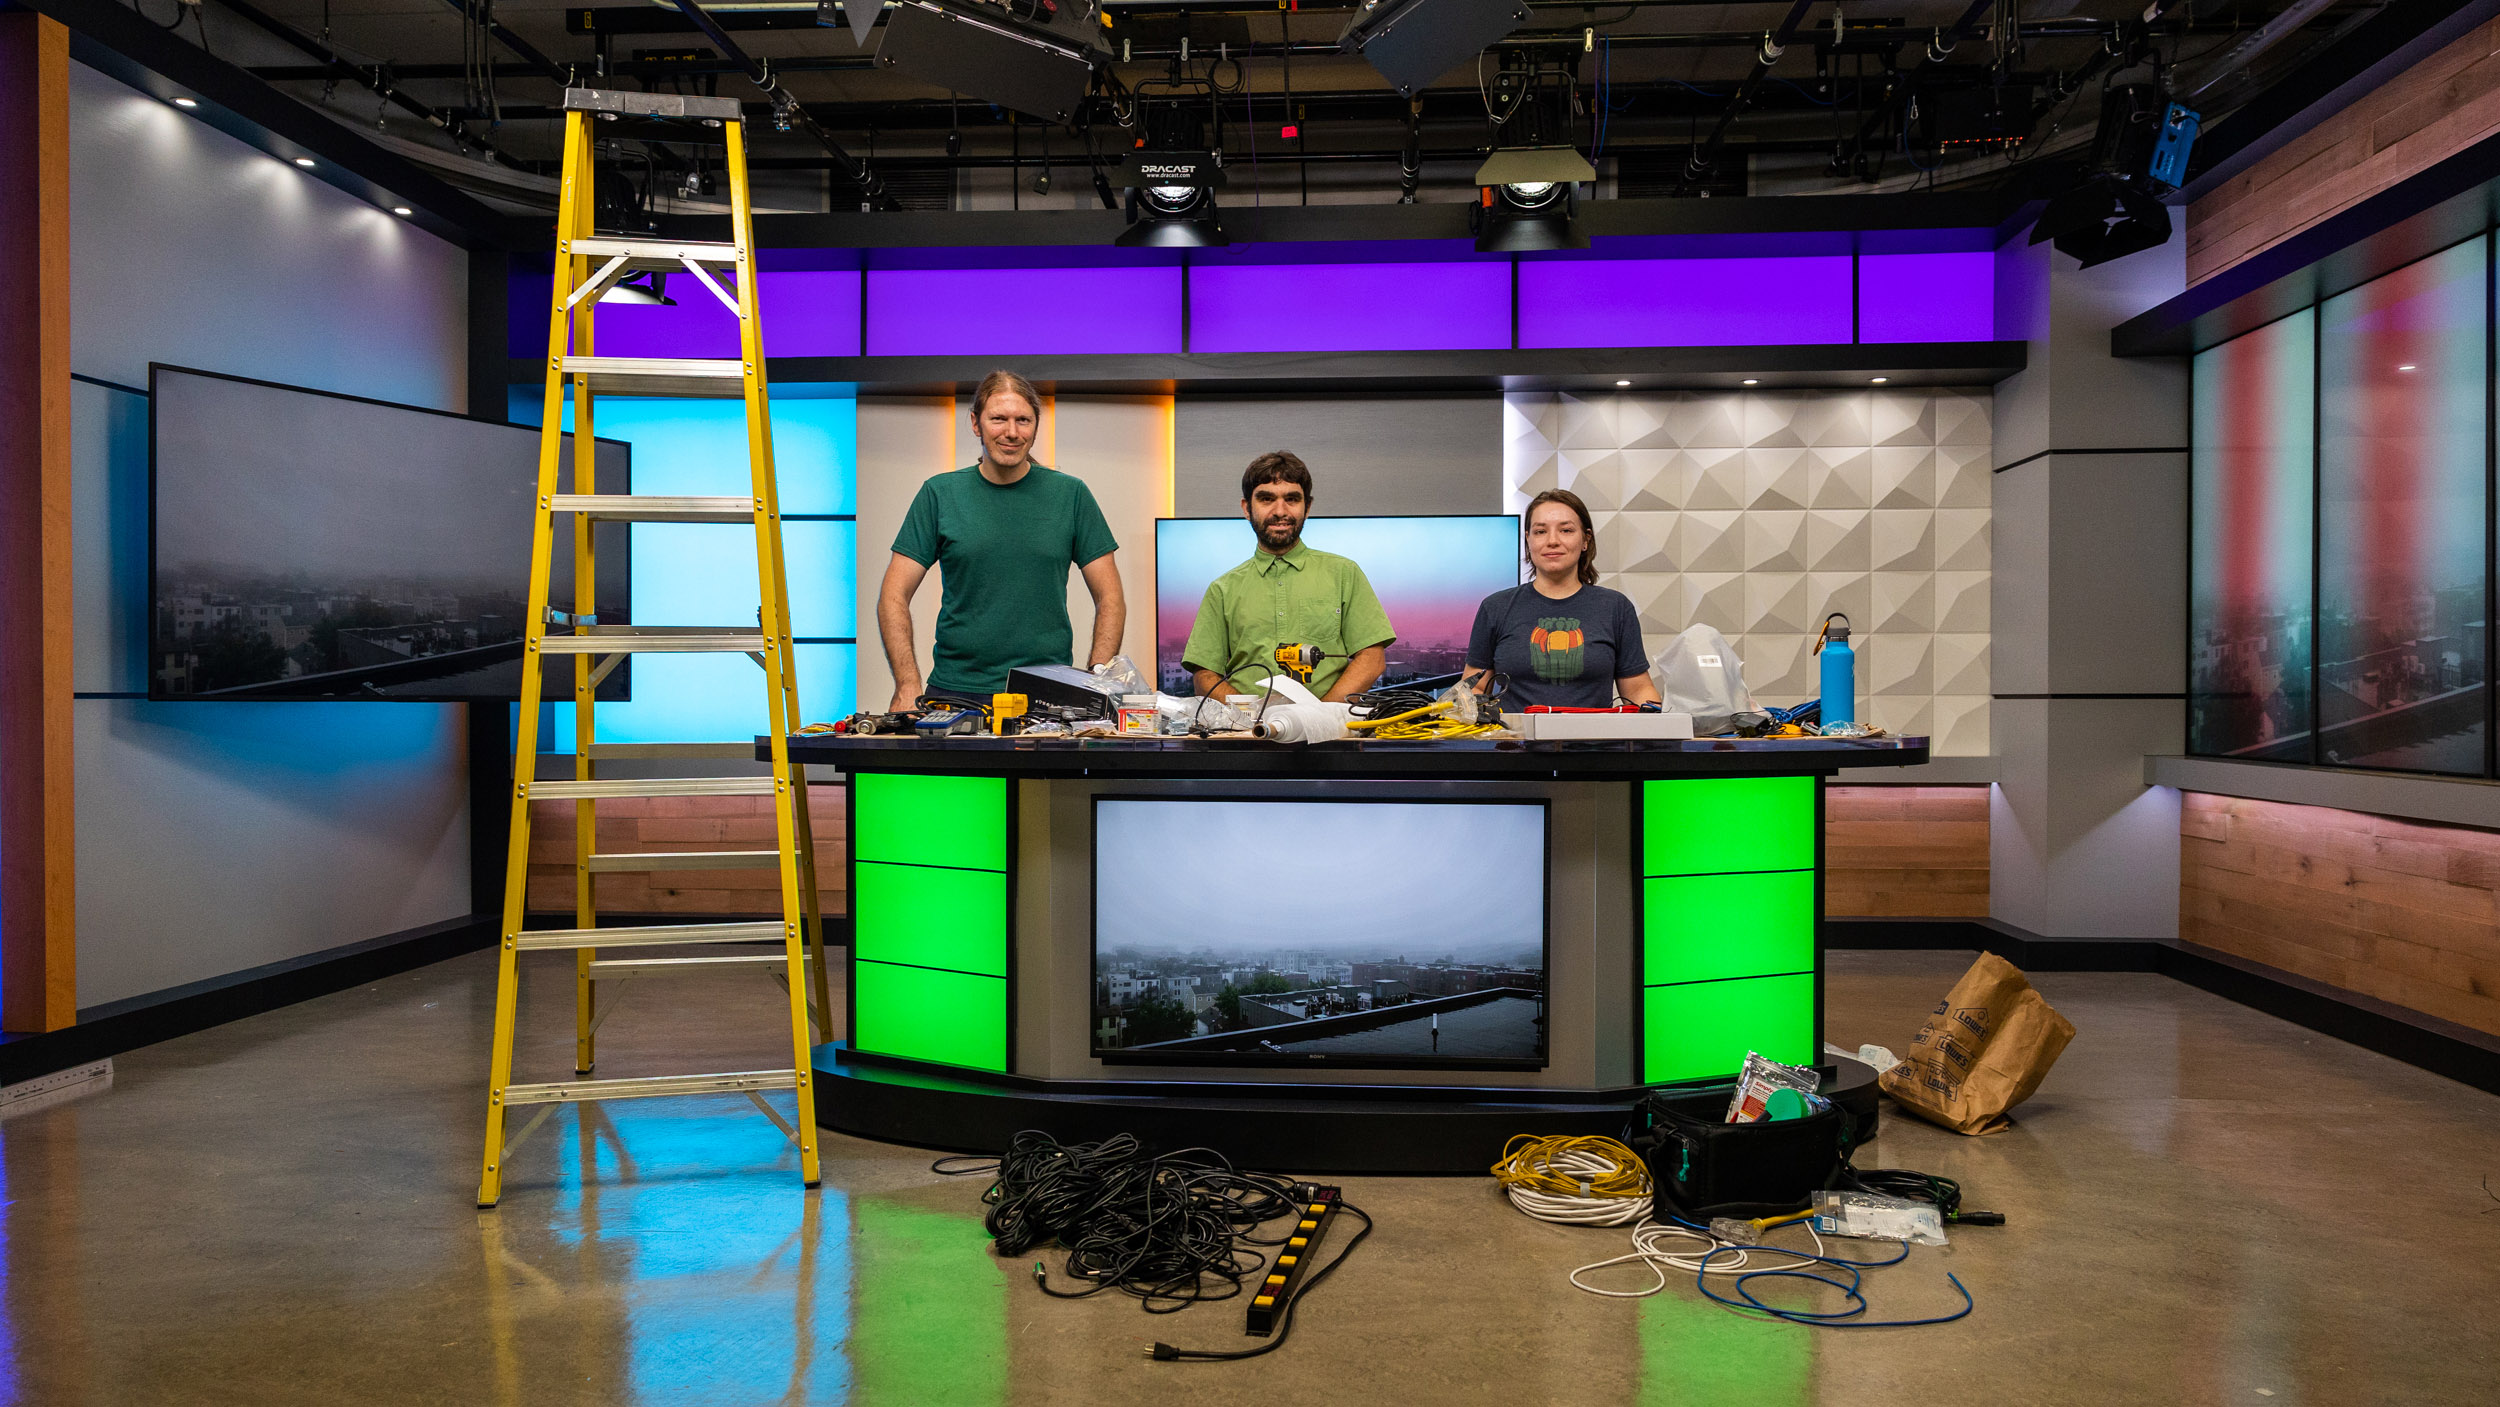 Tristan Olly (lead studio engineer), Jake Kassen (technical operations manager) and Emma Picht (COM ’23) (media technician) pose at the new anchor desk in Studio West. Photo by Guramar Lepiarz.